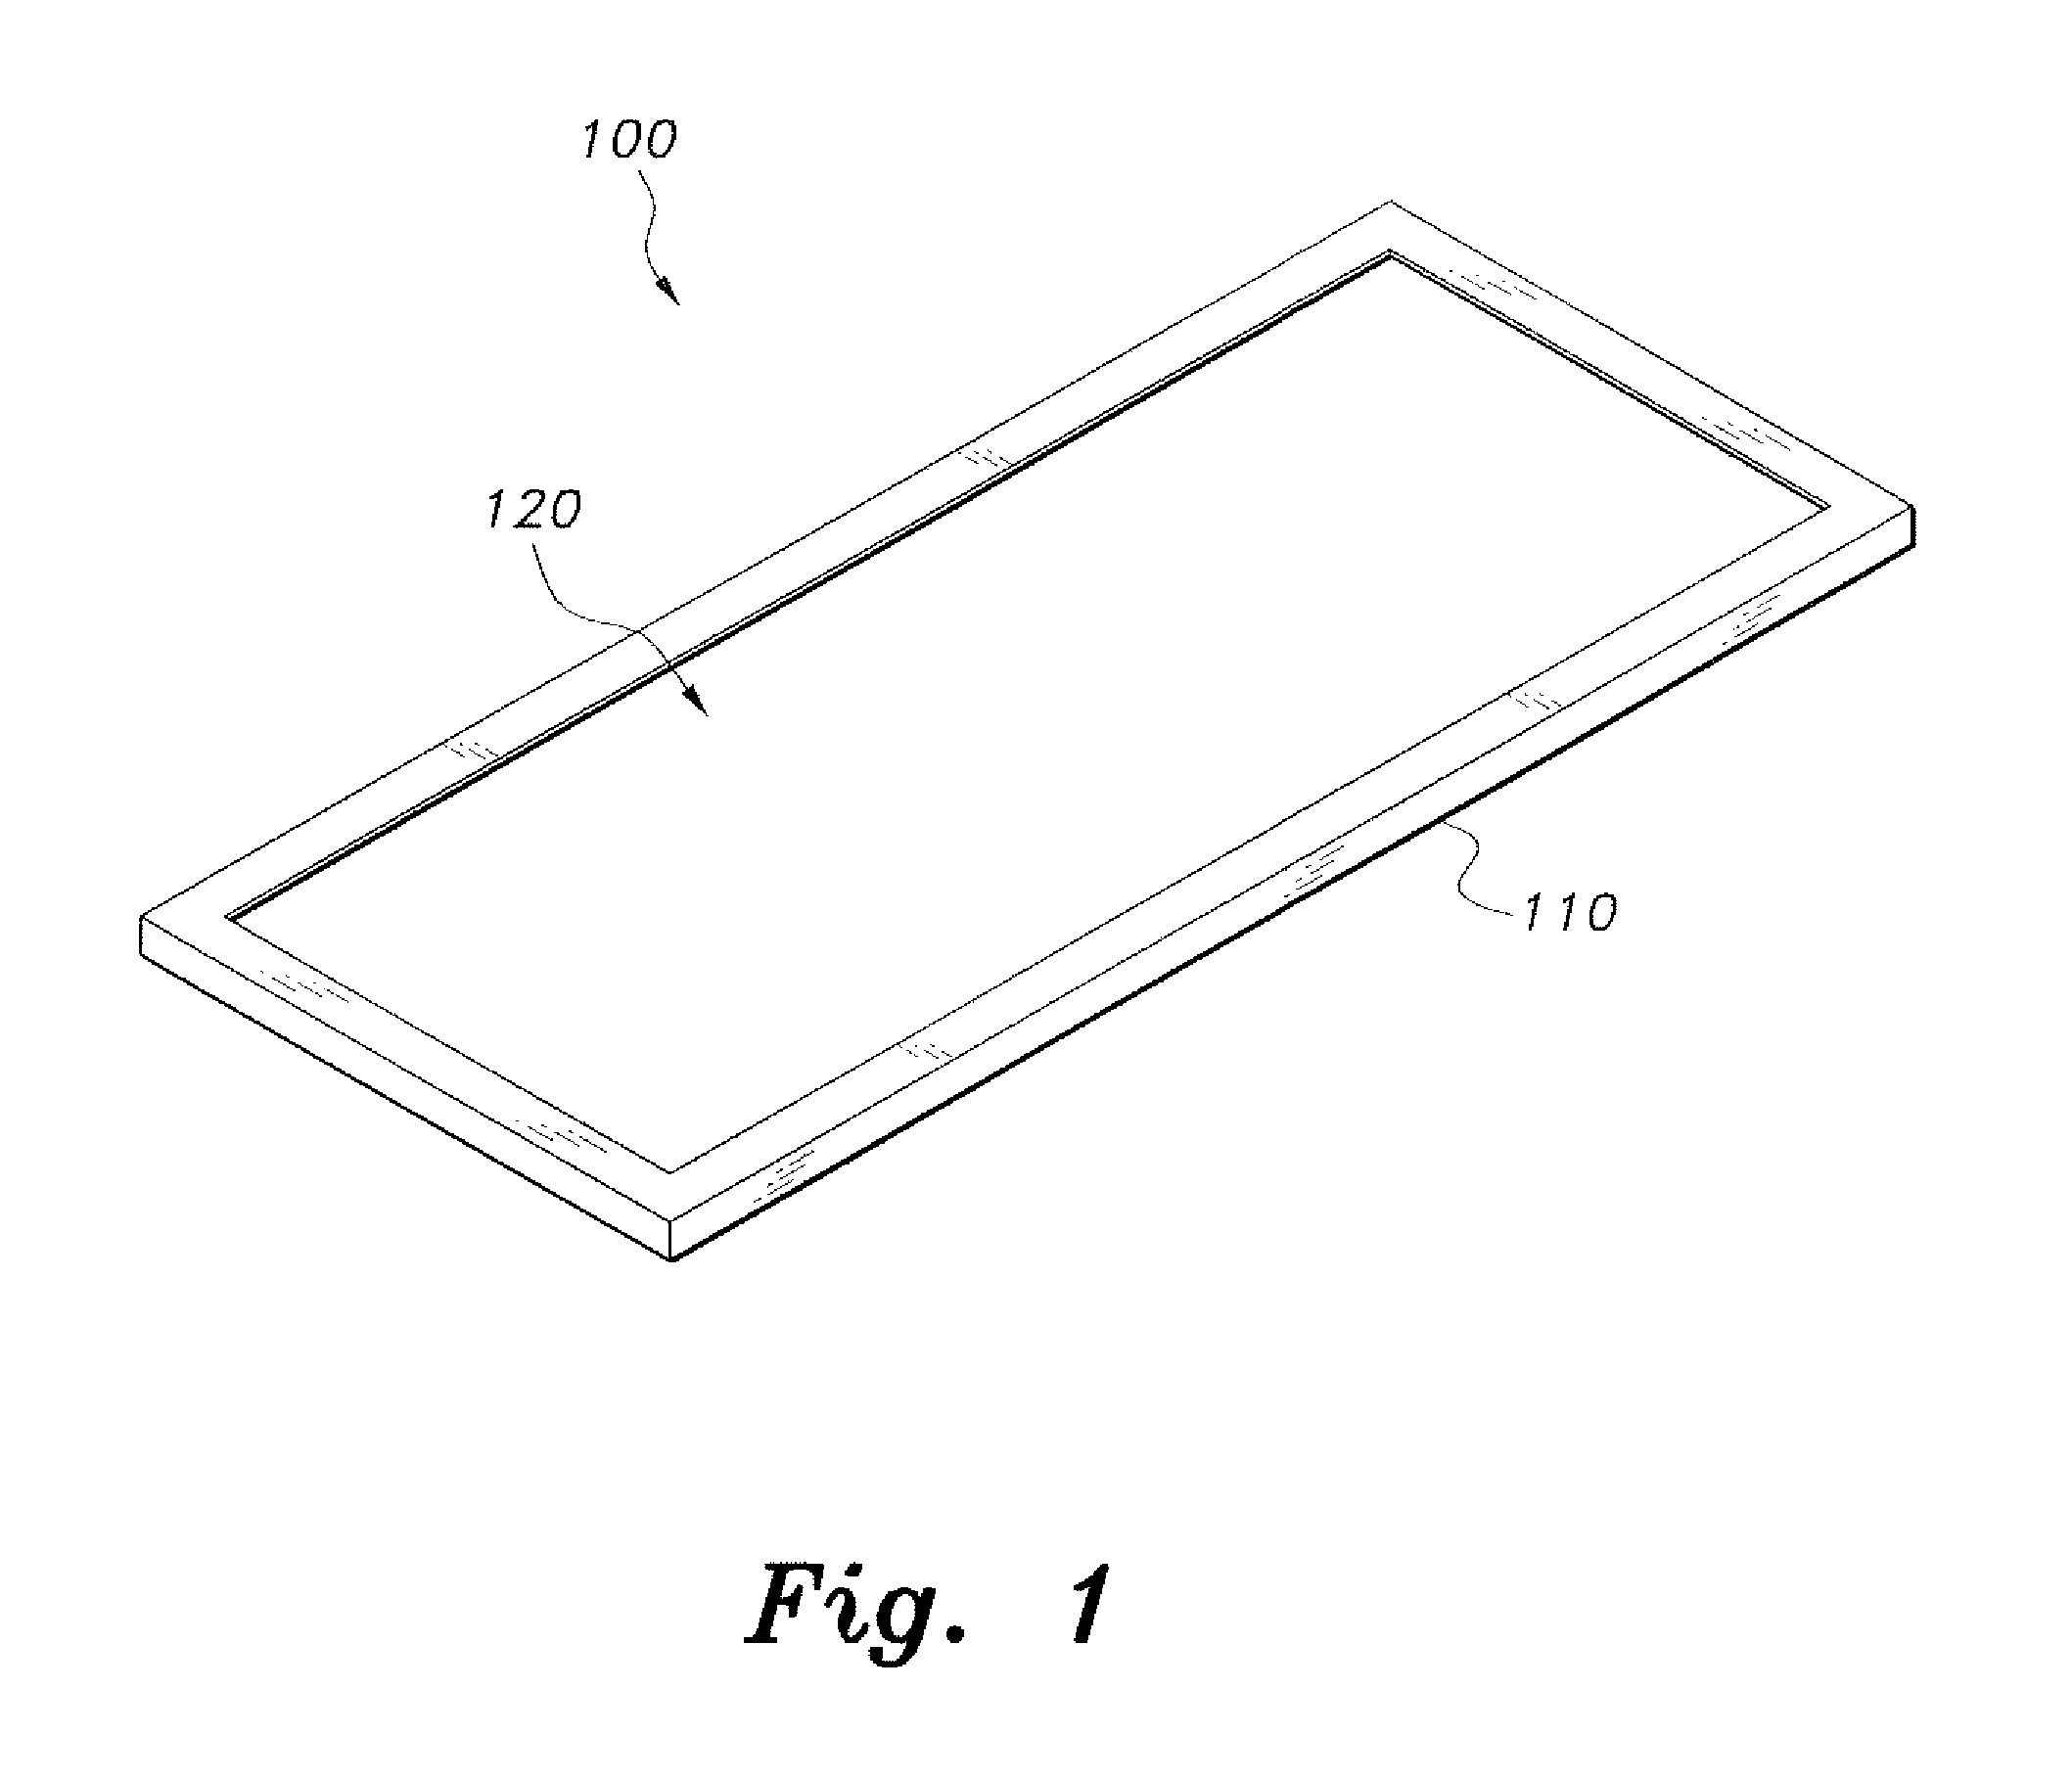 Dual axis solar tracker apparatus and method